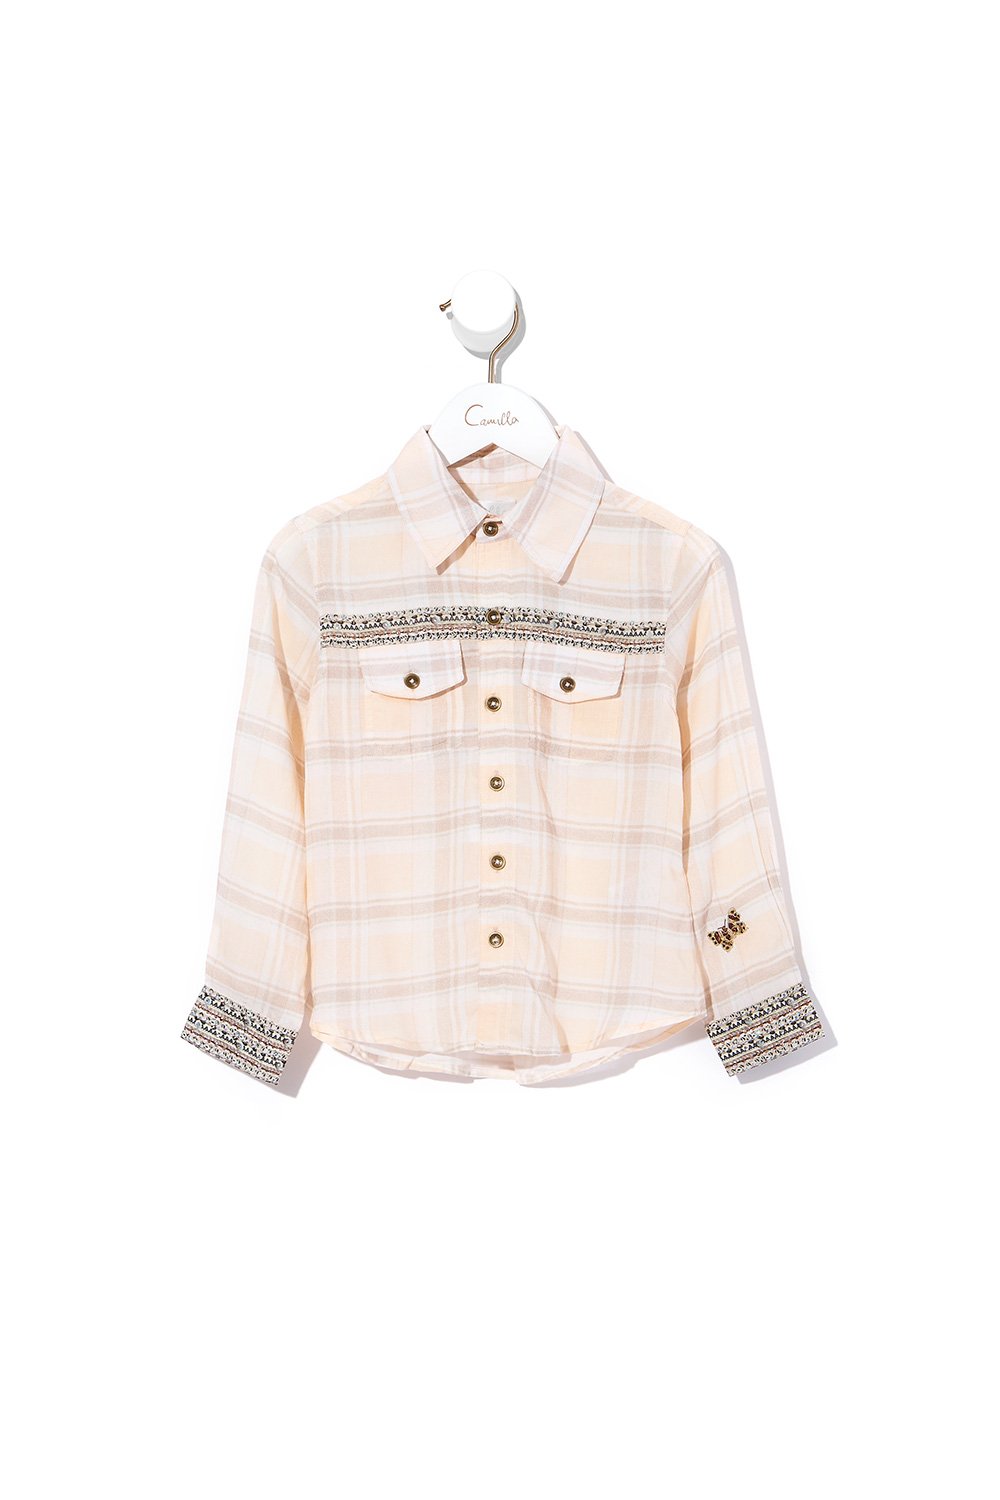 KIDS BUTTON FRONT SHIRT KINDRED SKIES